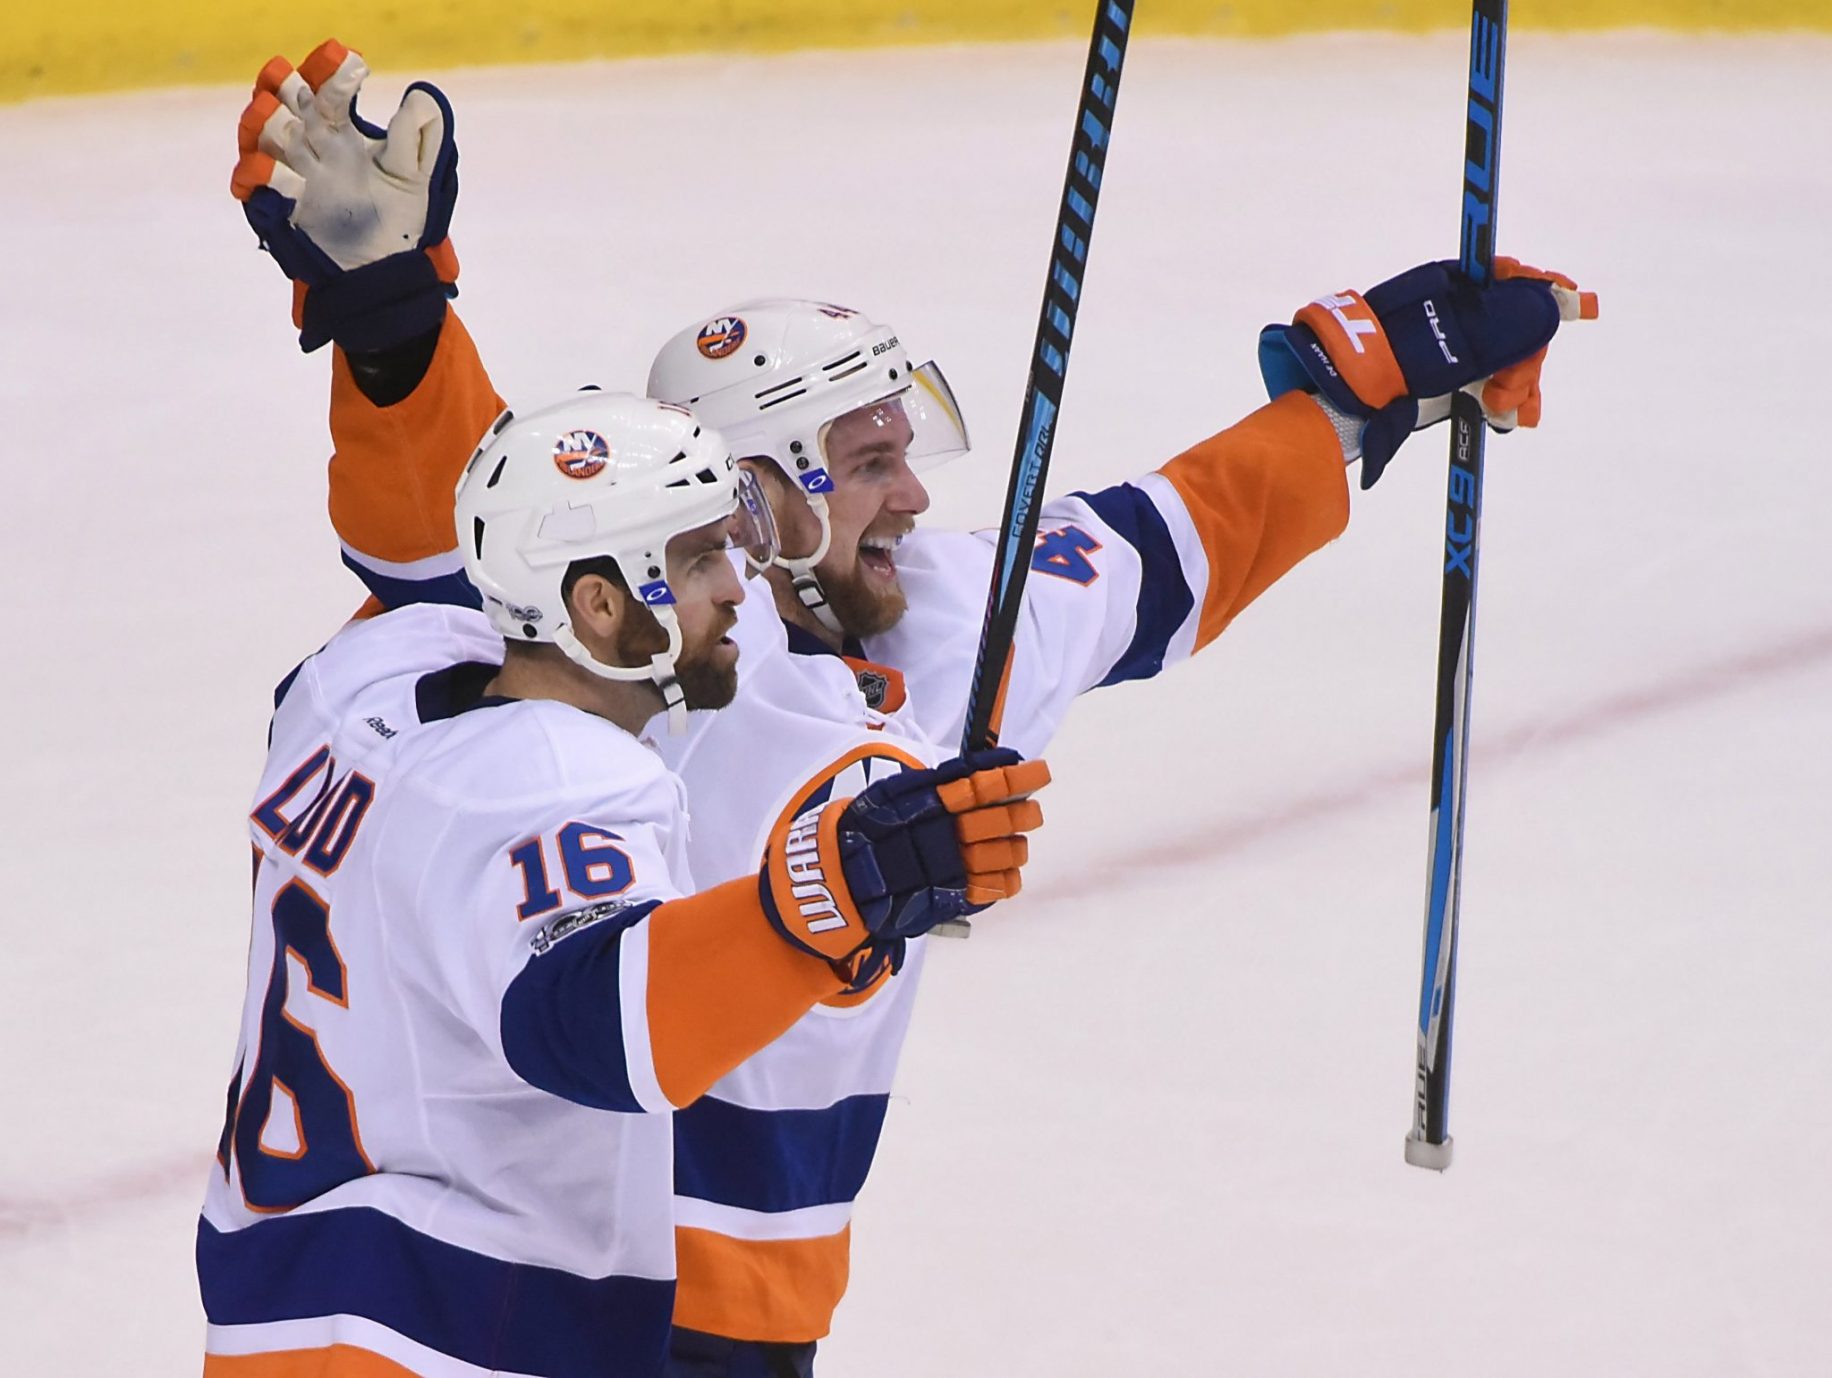 Andrew Ladd lifts Islanders to OT win after blowing late lead (Highlights) 2